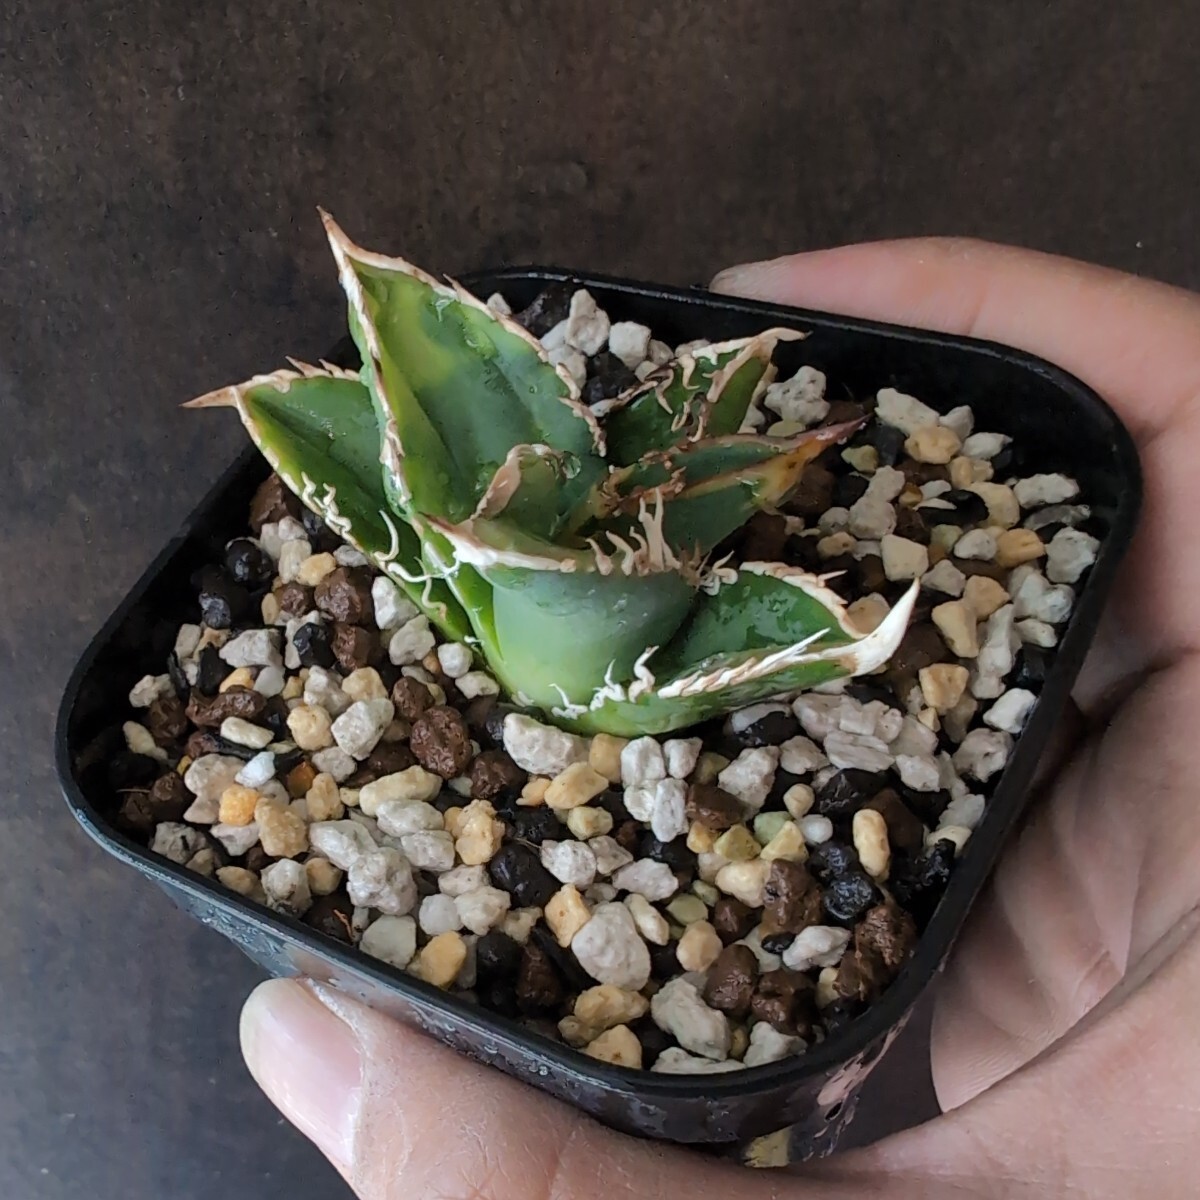 【AGAVE TITANOTA LIZE 穿山甲】アガベ　チタノタ　子株_画像3